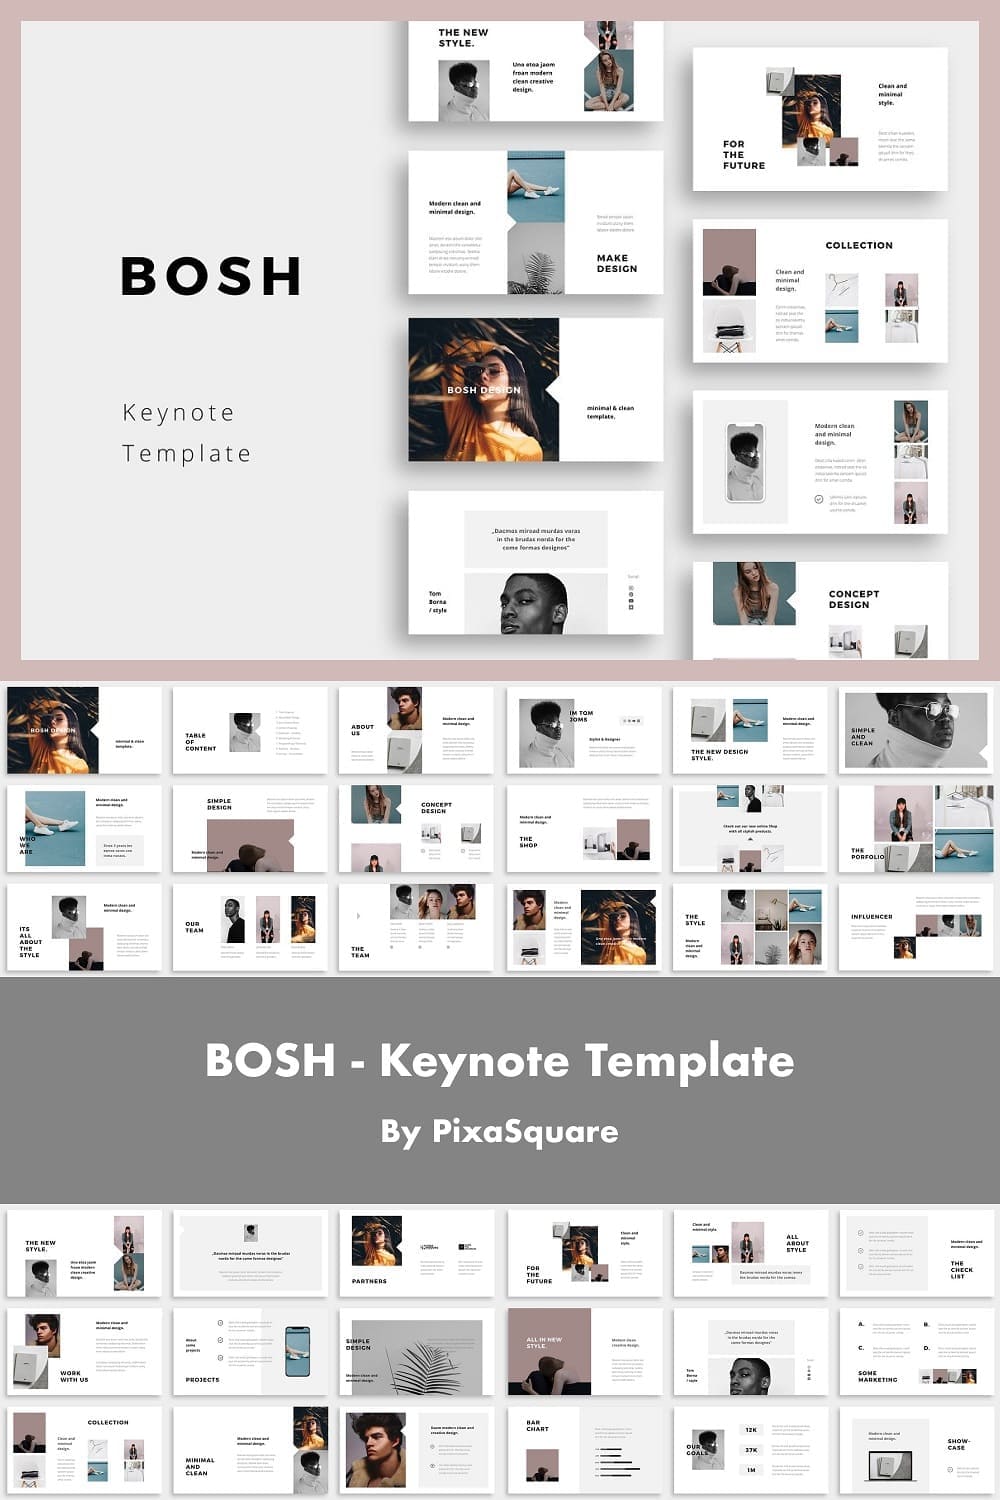 Table of content of Bosh keynote template.